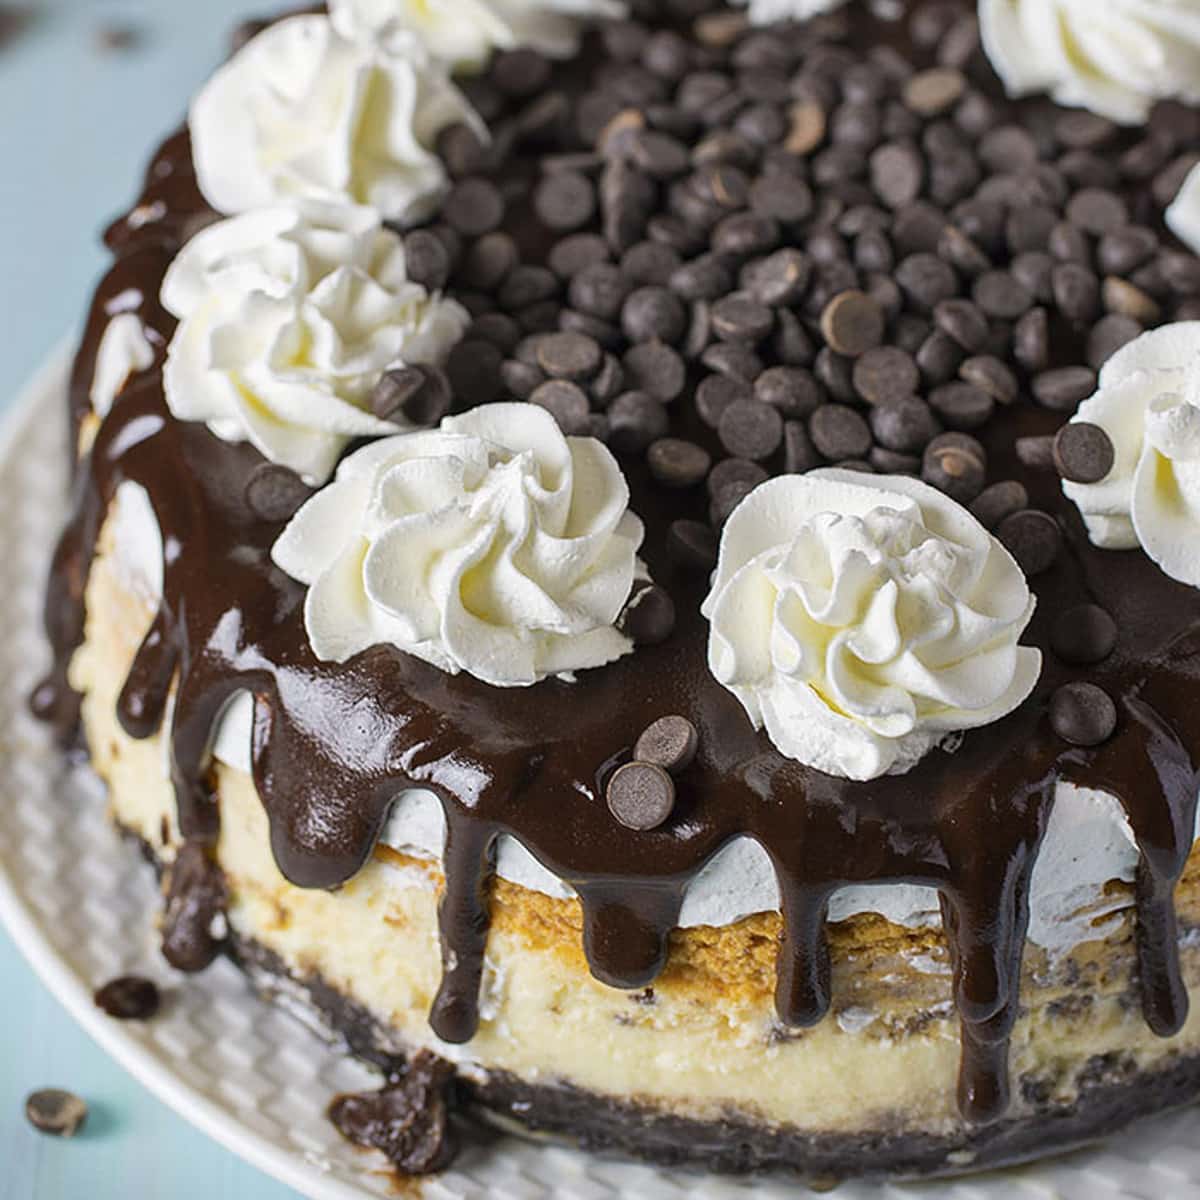 Thanksgiving desserts - a double layer pumpkin cheesecake topped with chocolate sauce and whipped cream.